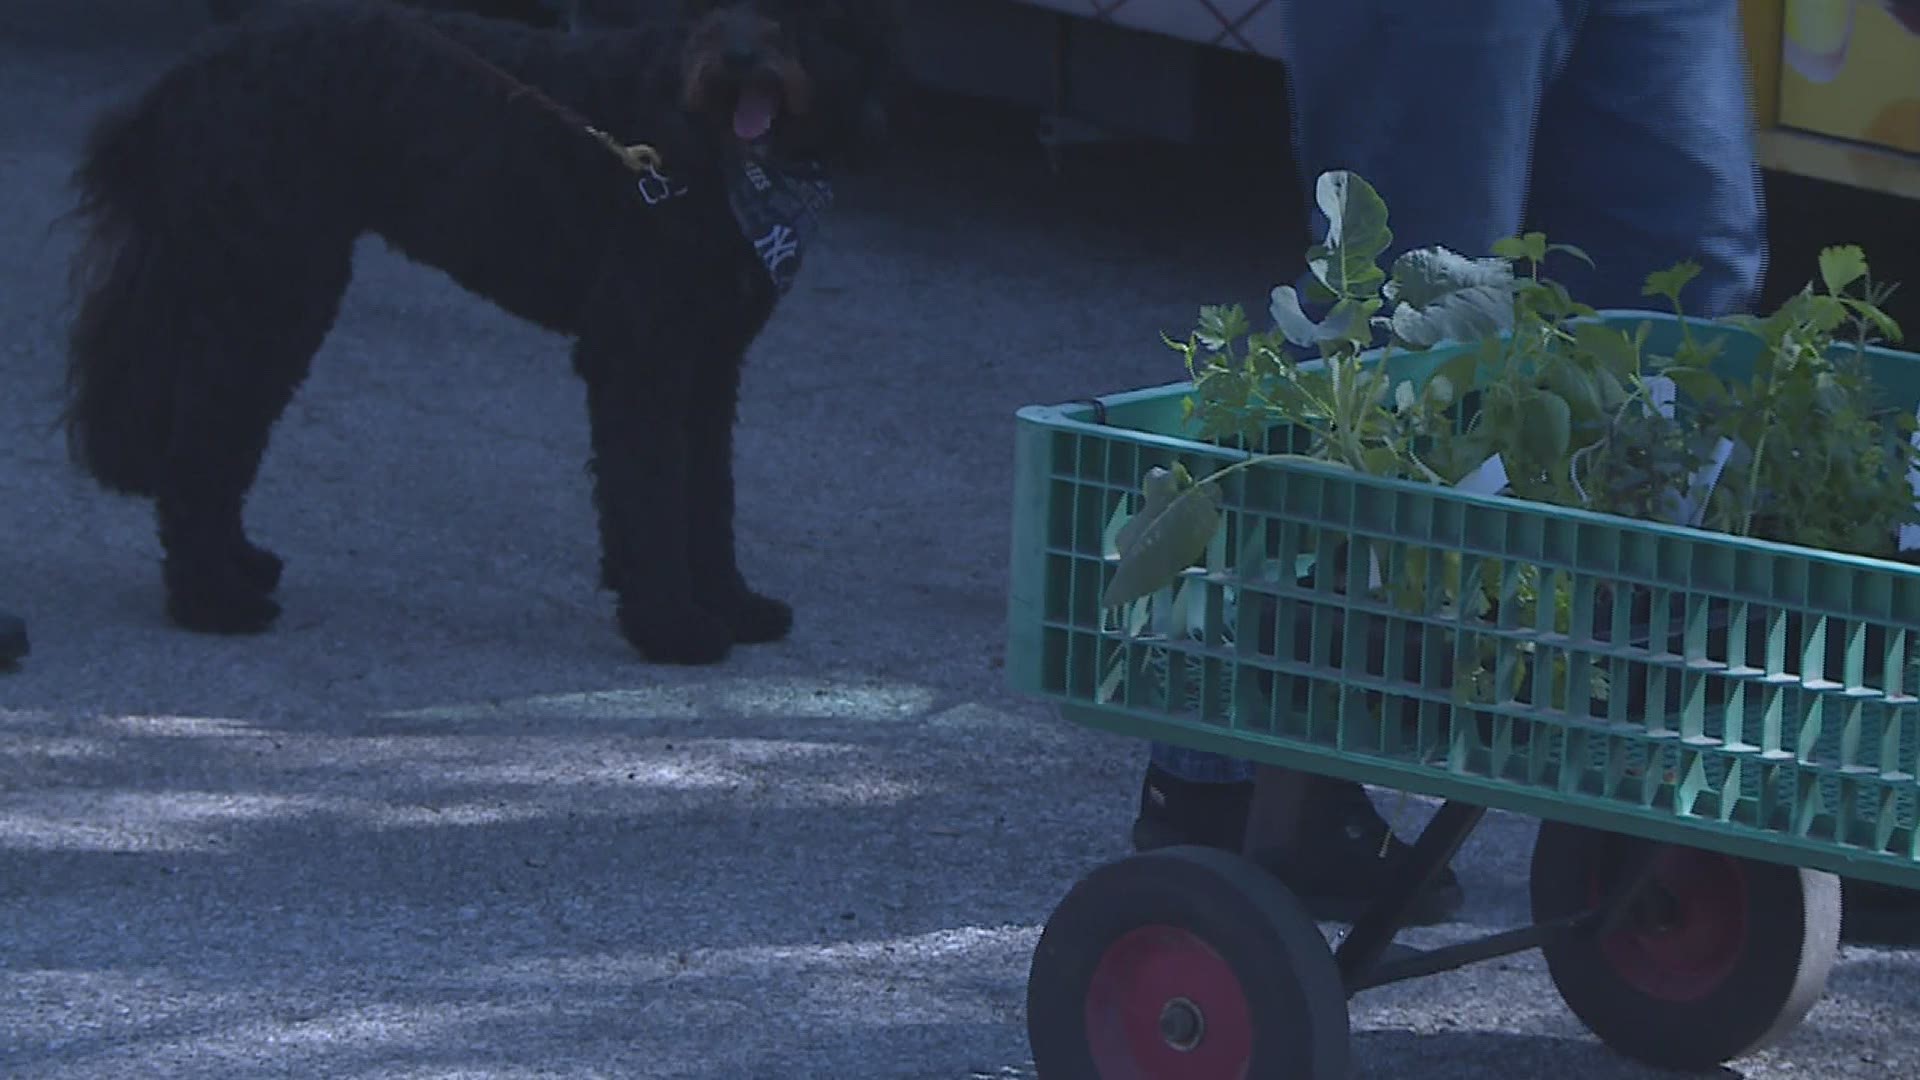 The farmers market drew a huge crowd in downtown Davenport for its opening weekend.